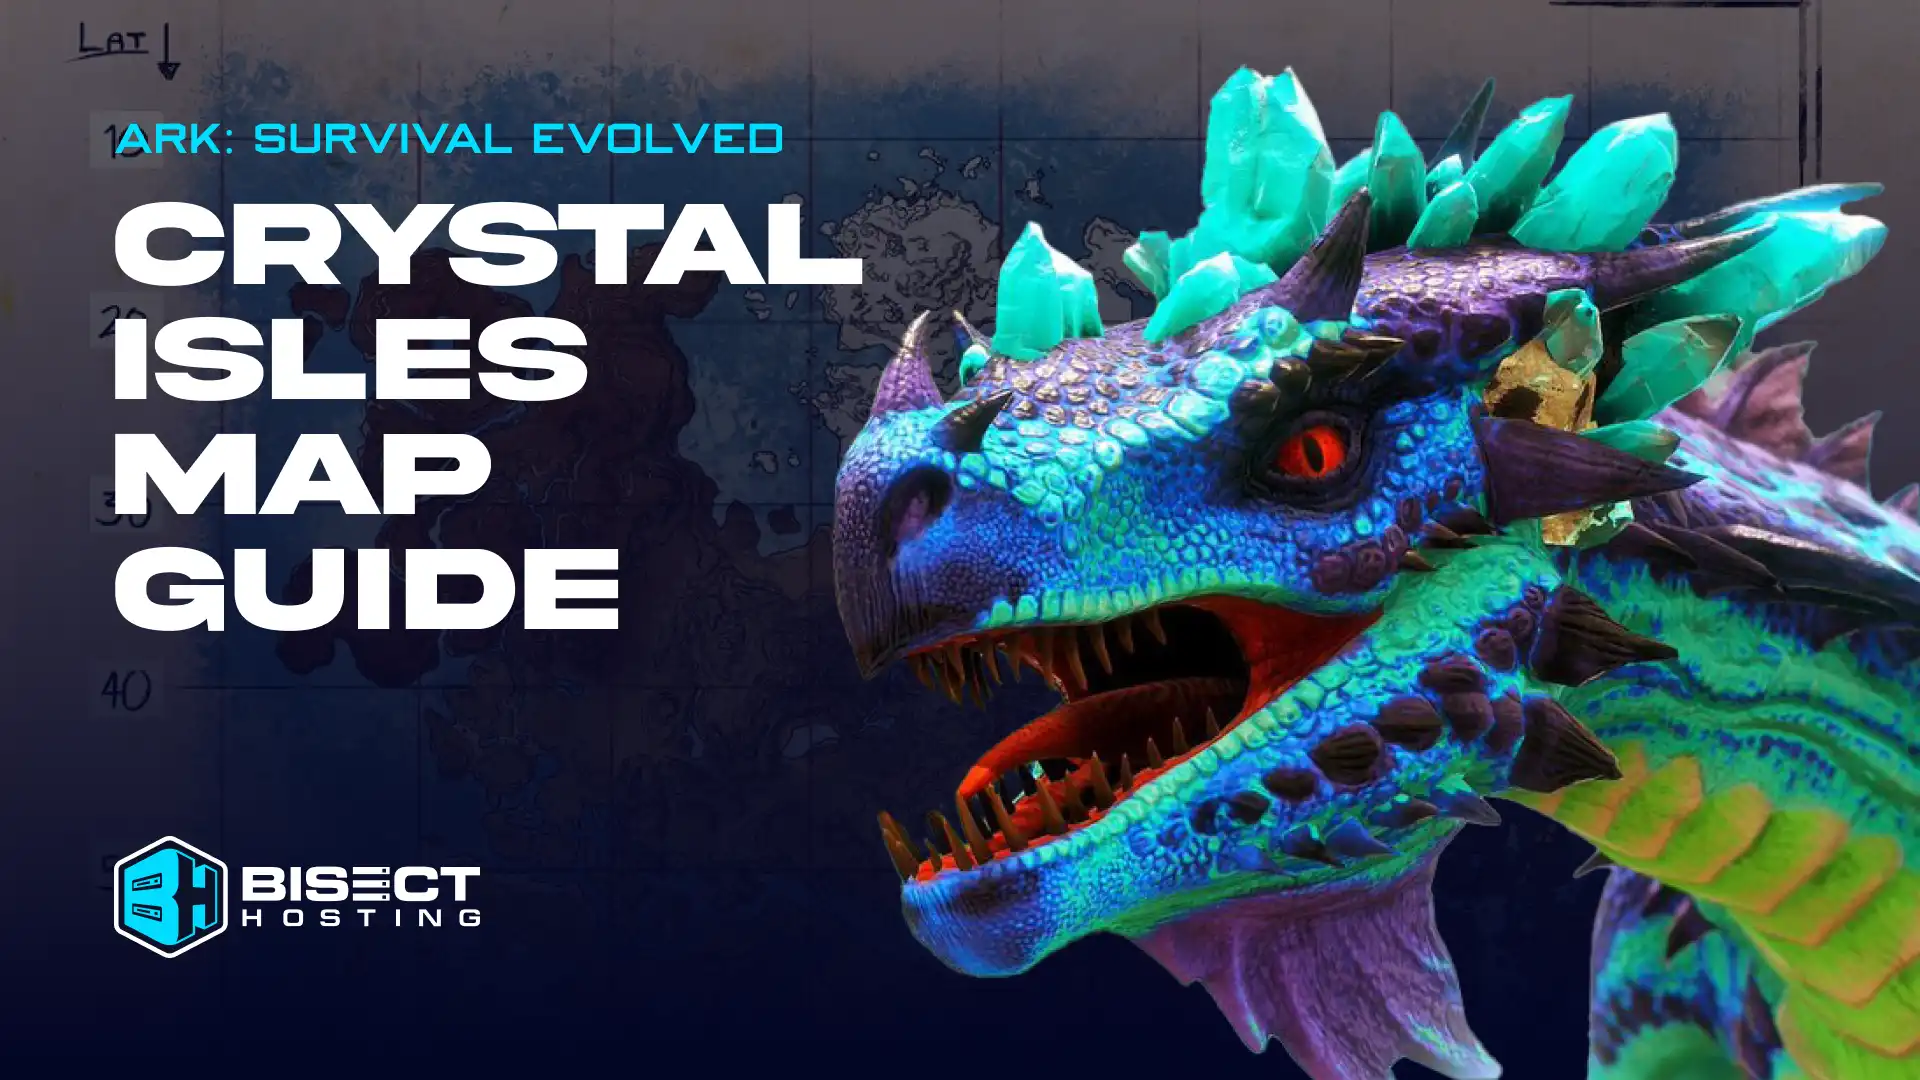 ARK: Survival Evolved Crystal Isles: Resource Locations, Bosses, & Dinos